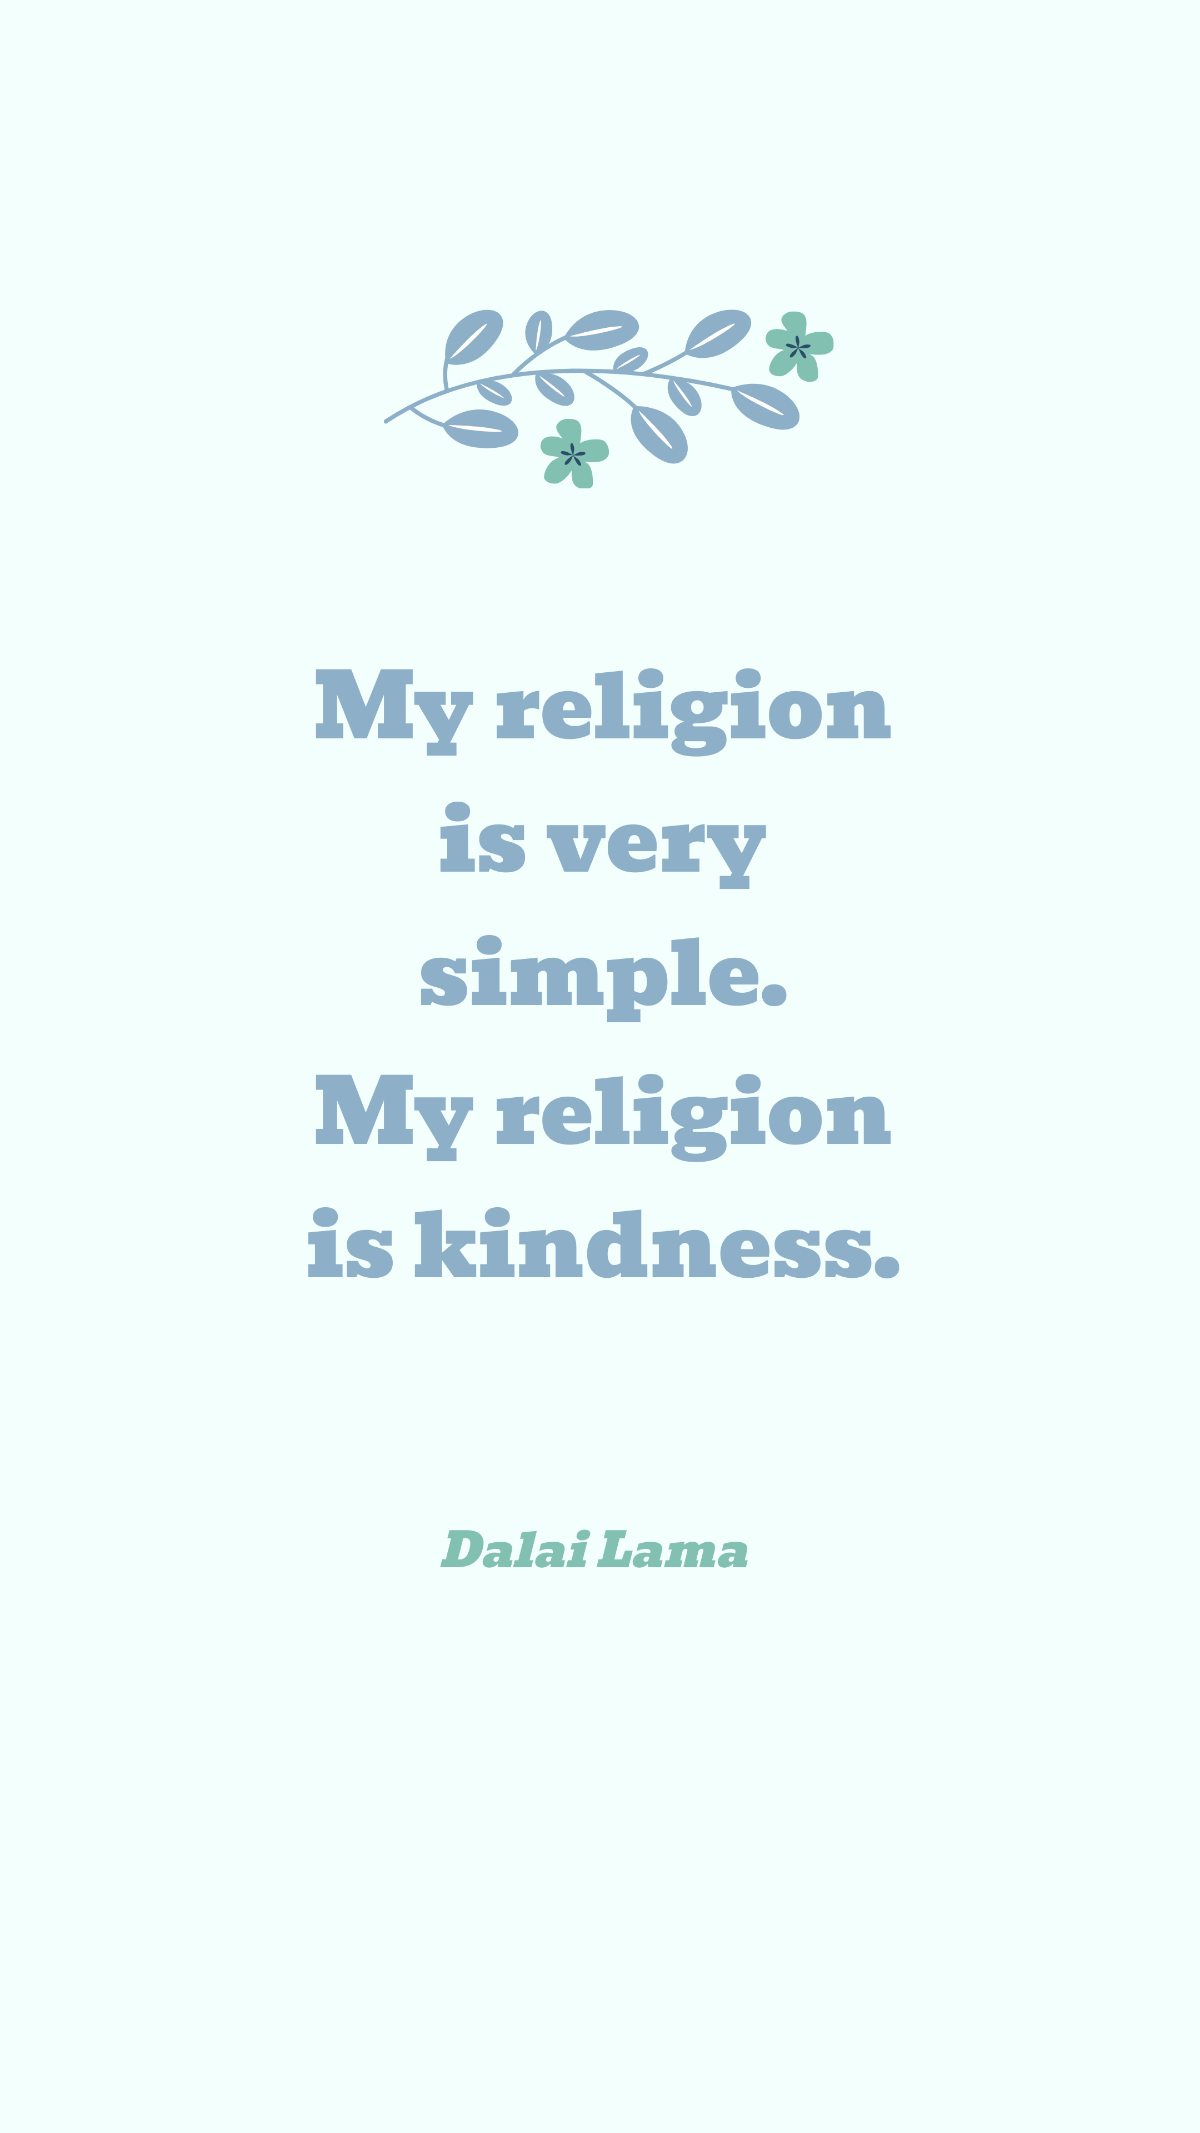 Dalai Lama - My religion is very simple. My religion is kindness.